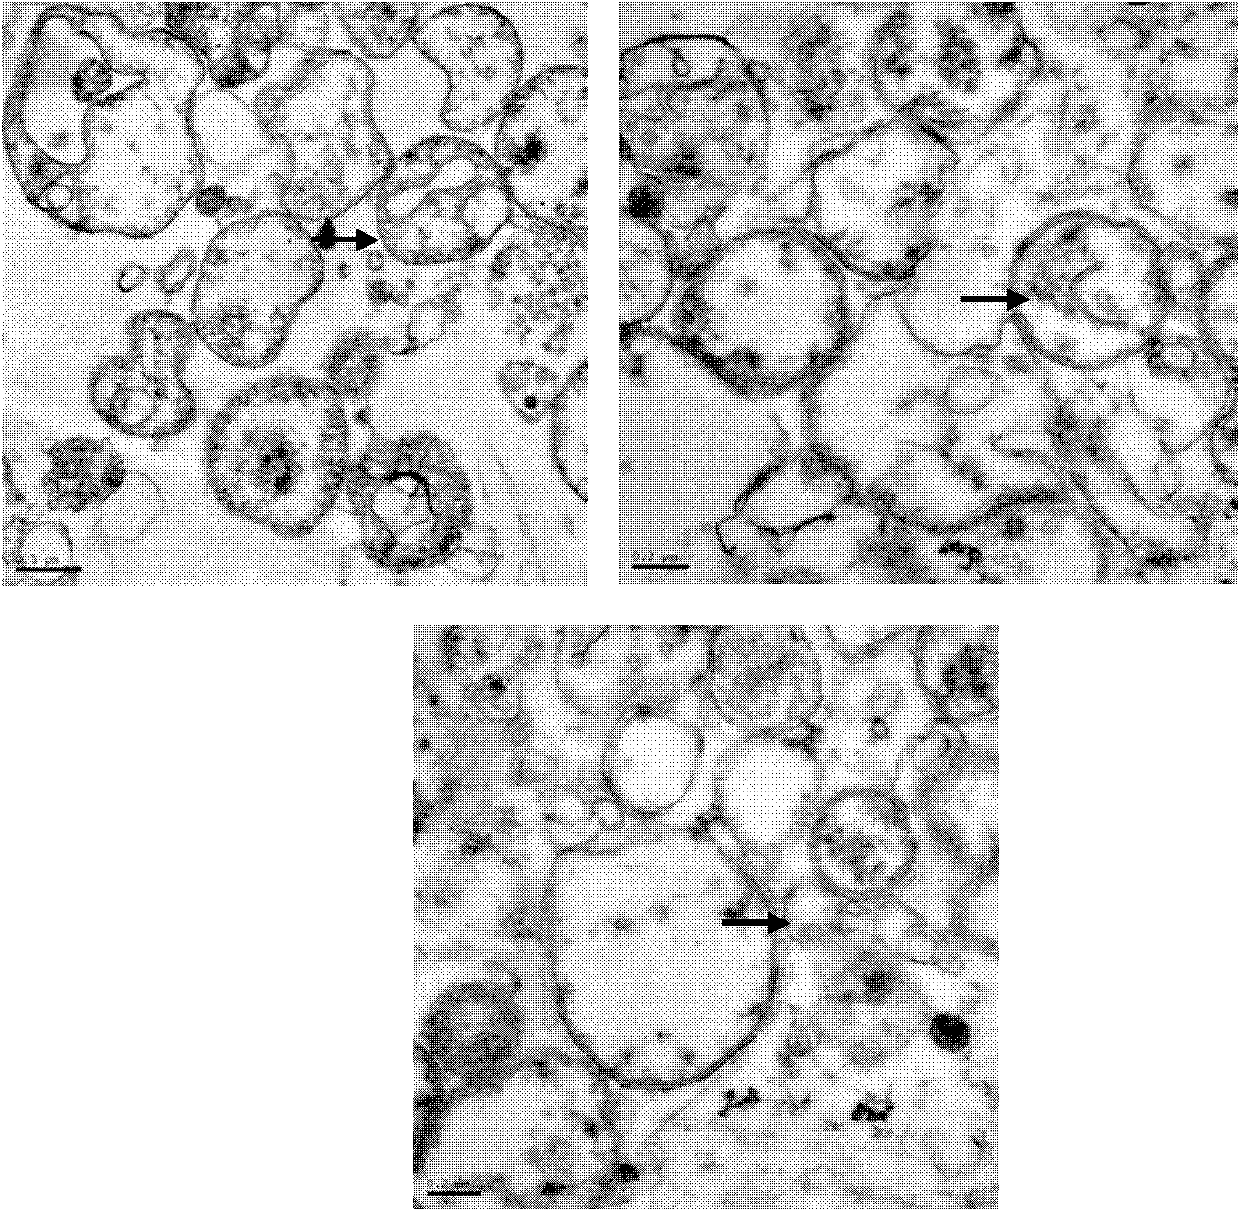 Application of H22 liver cancer cell autophagosome to preparation of liver cancer therapeutic vaccine